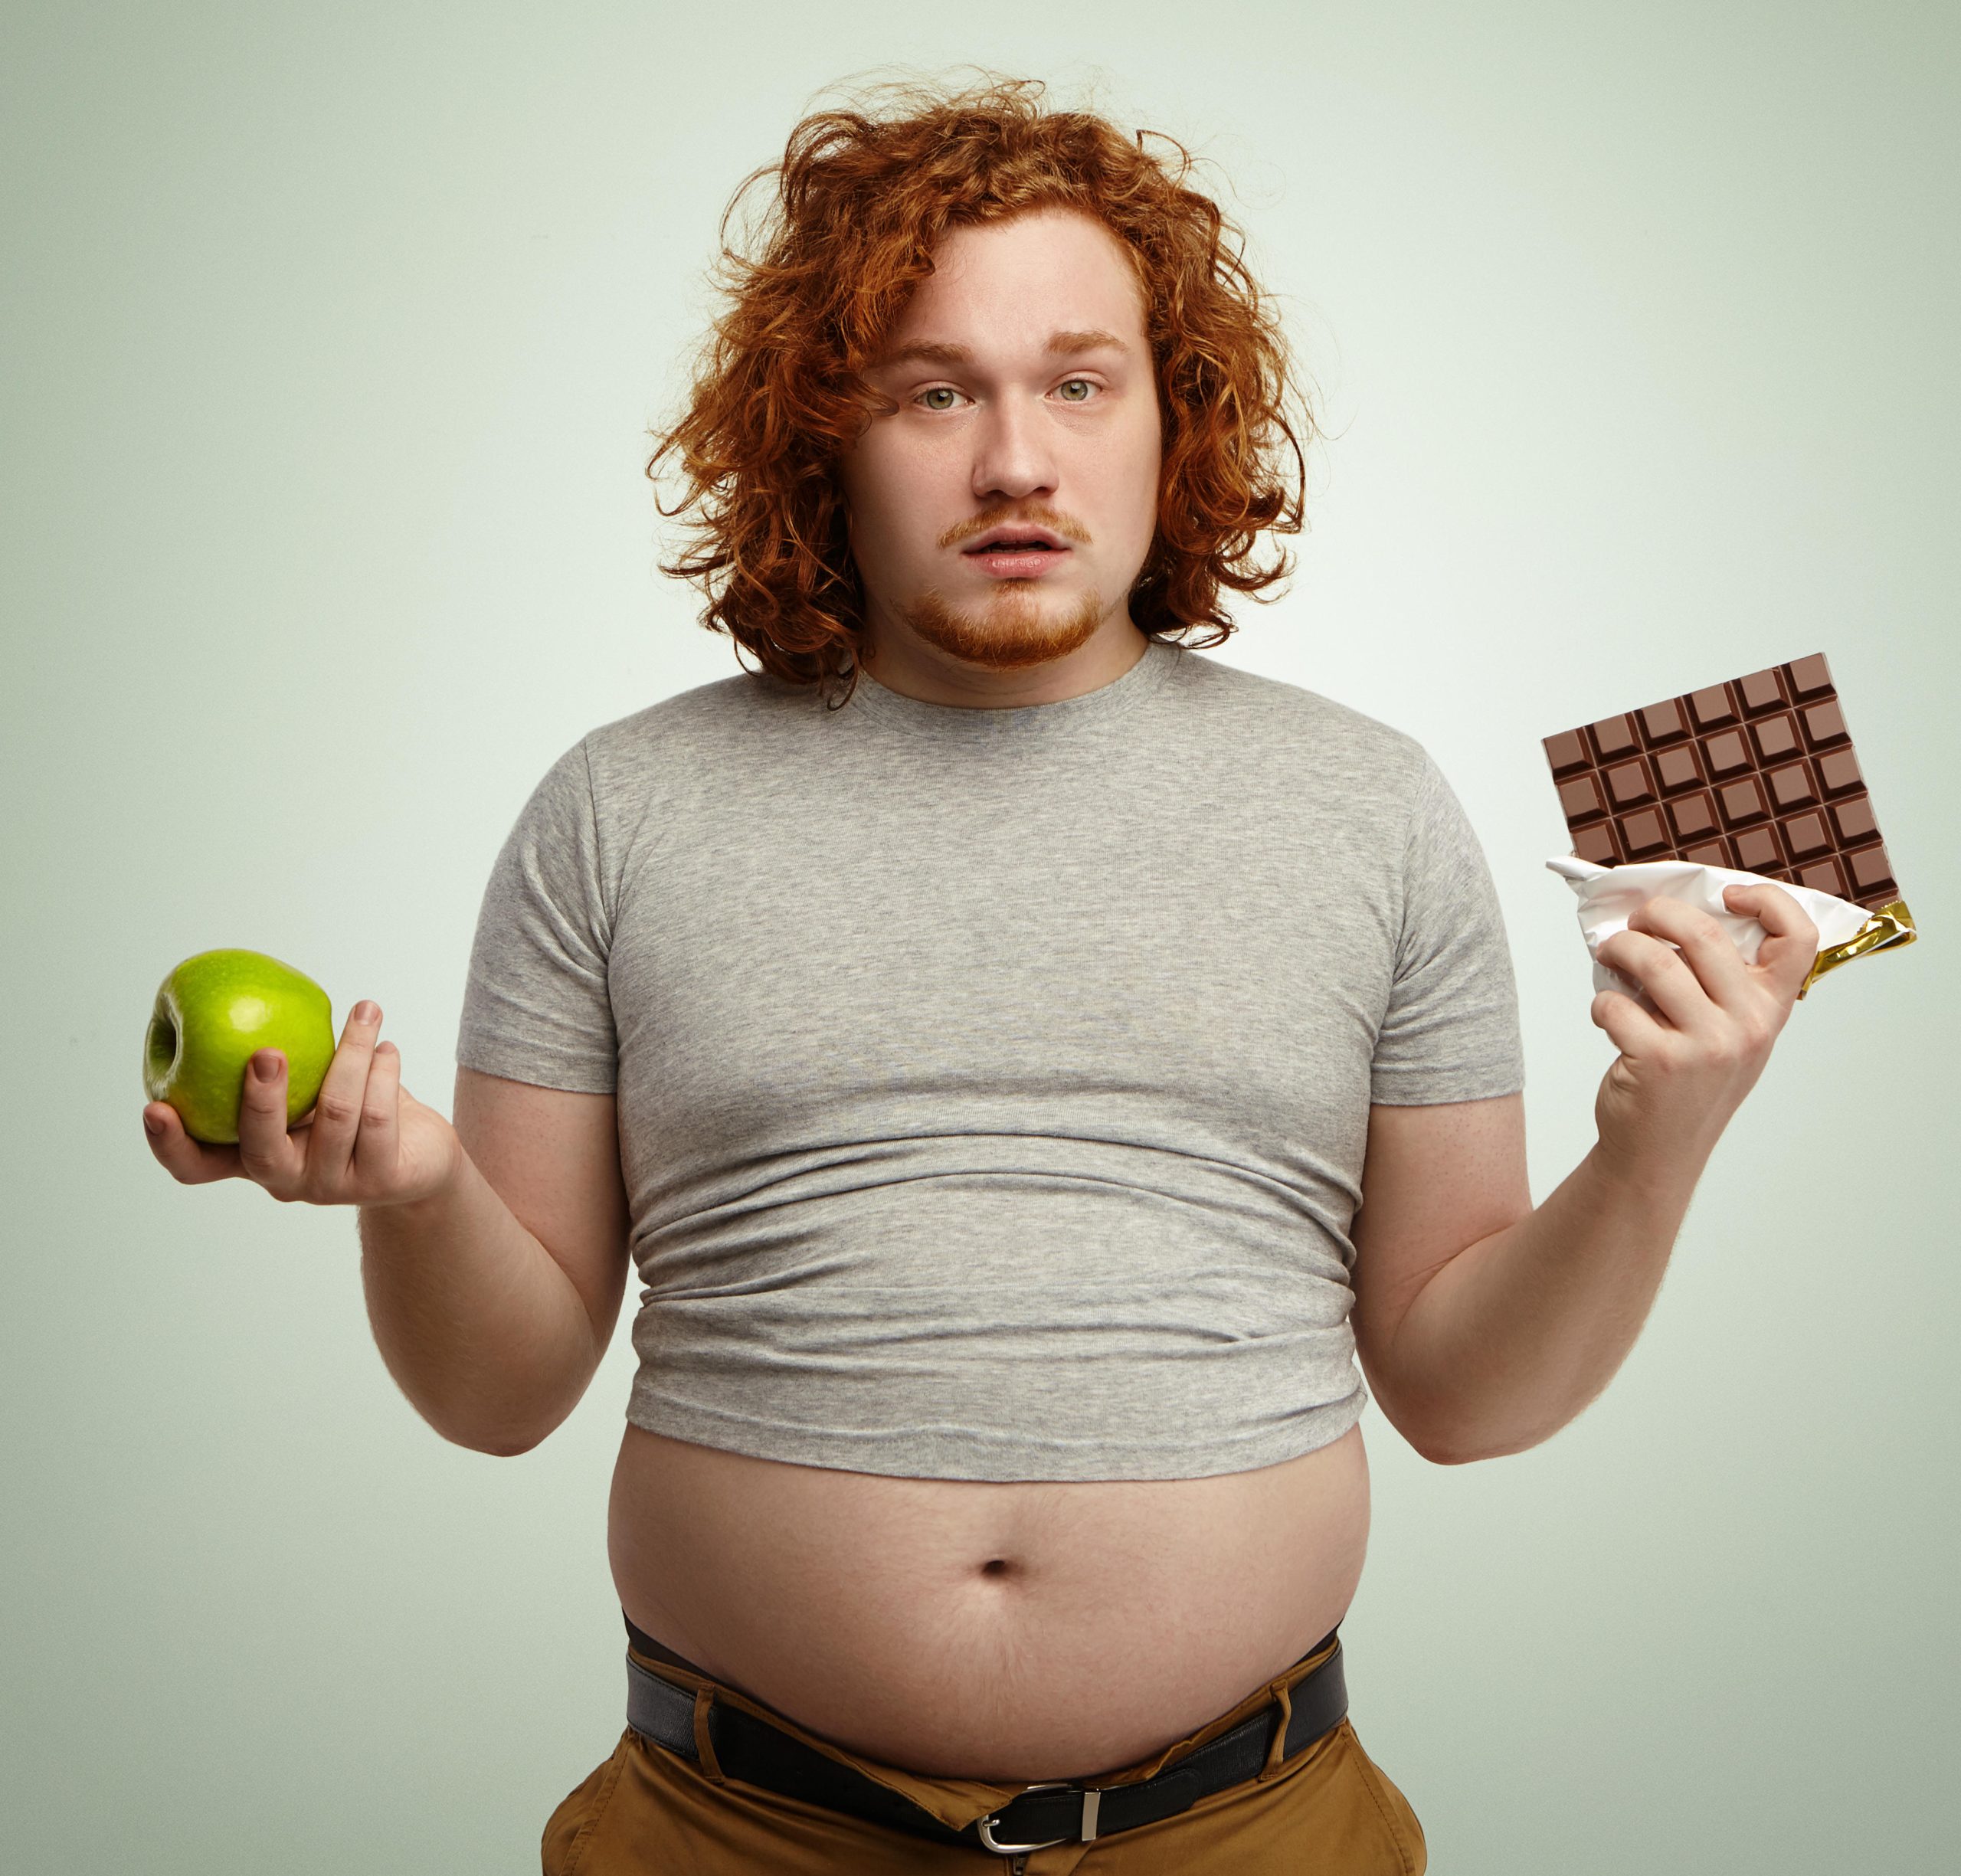 overweight man with chocolate in one hand and an apple in the other with red hair looking like he doesn't understand the reasons he is not losing weight.